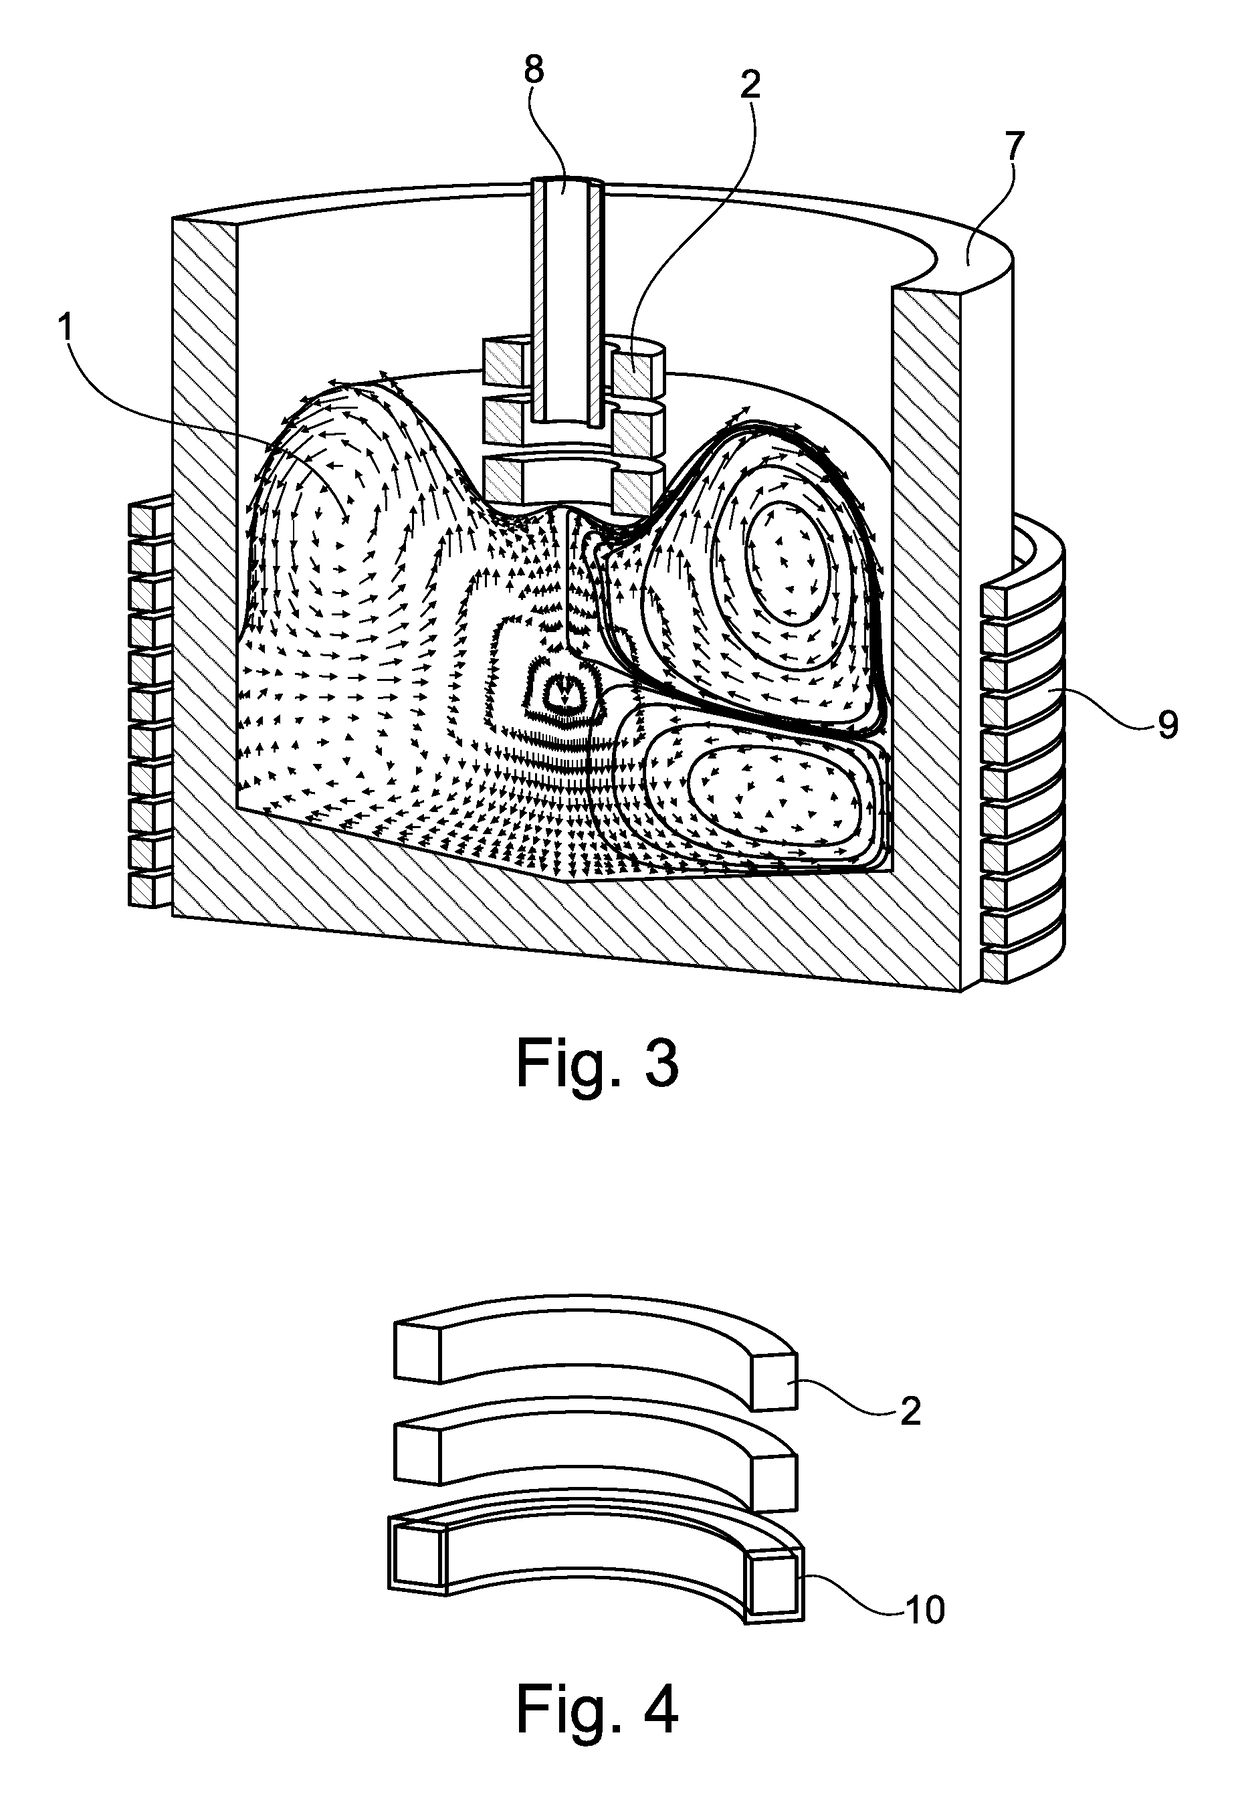 Manufacturing of a metal component or a metal matrix composite component involving contactless induction of high-frequency vibrations